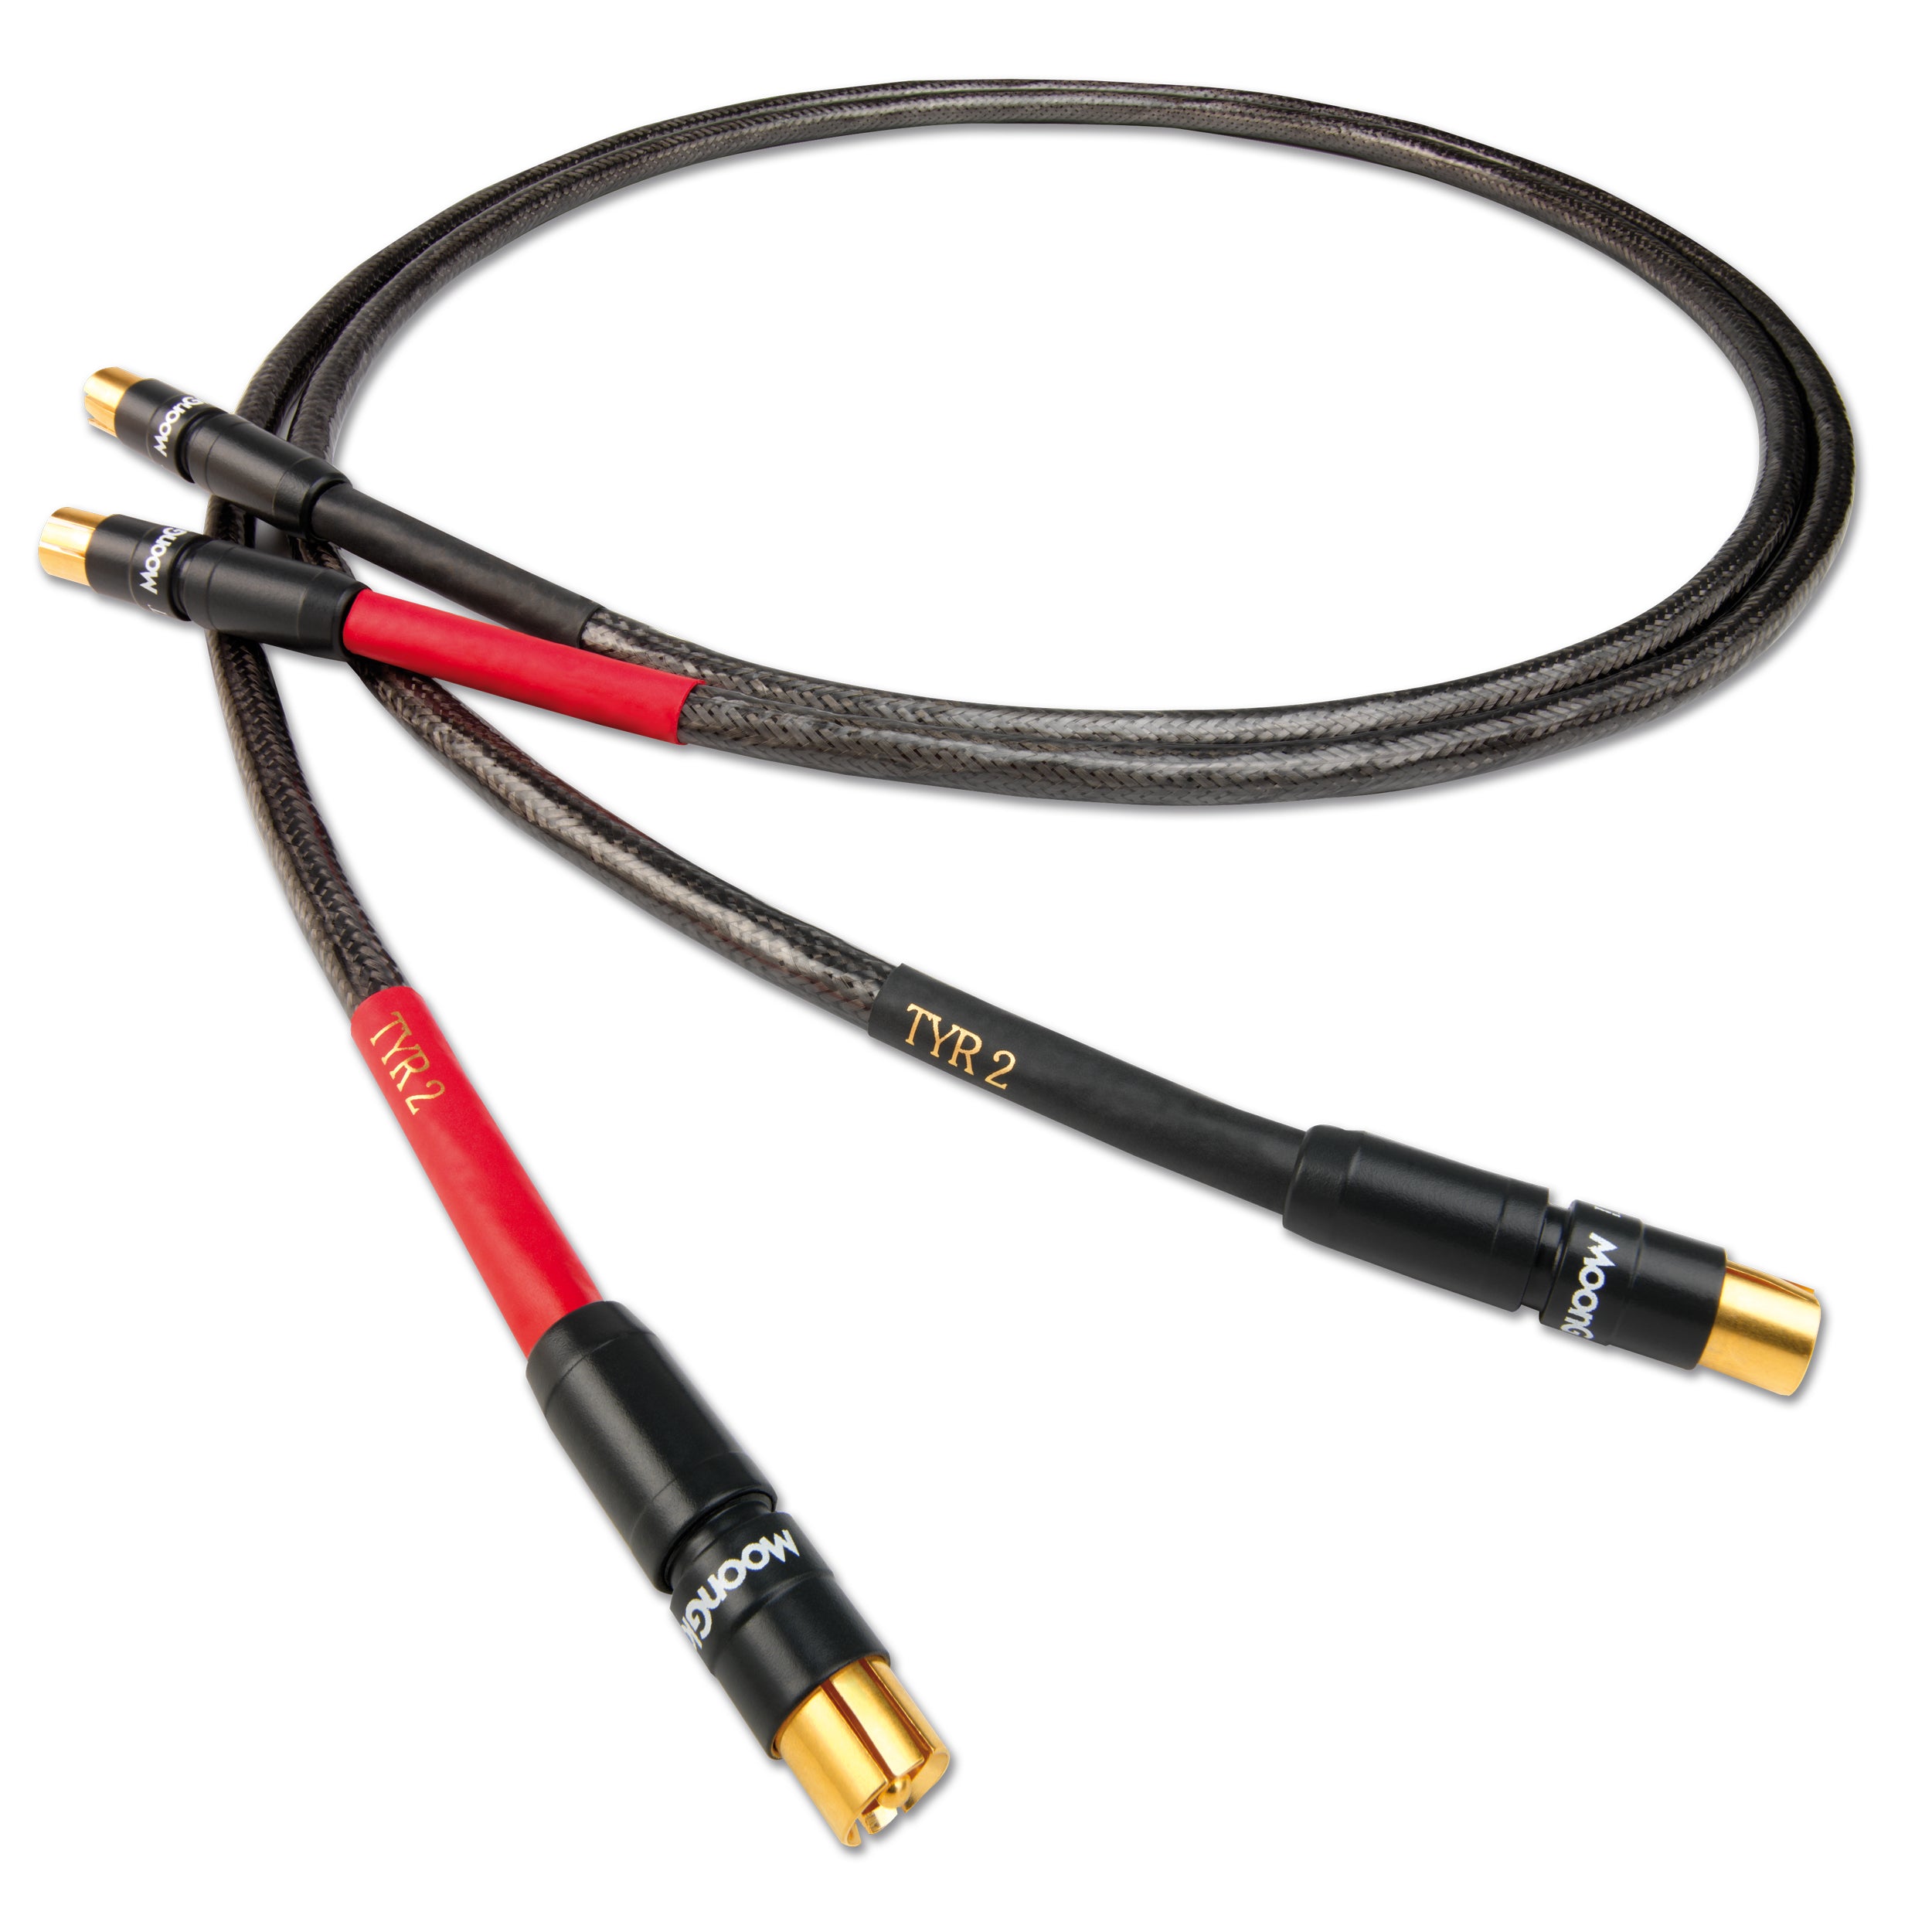 Nordost Norse Tyr 2 Analog Interconnect Cable